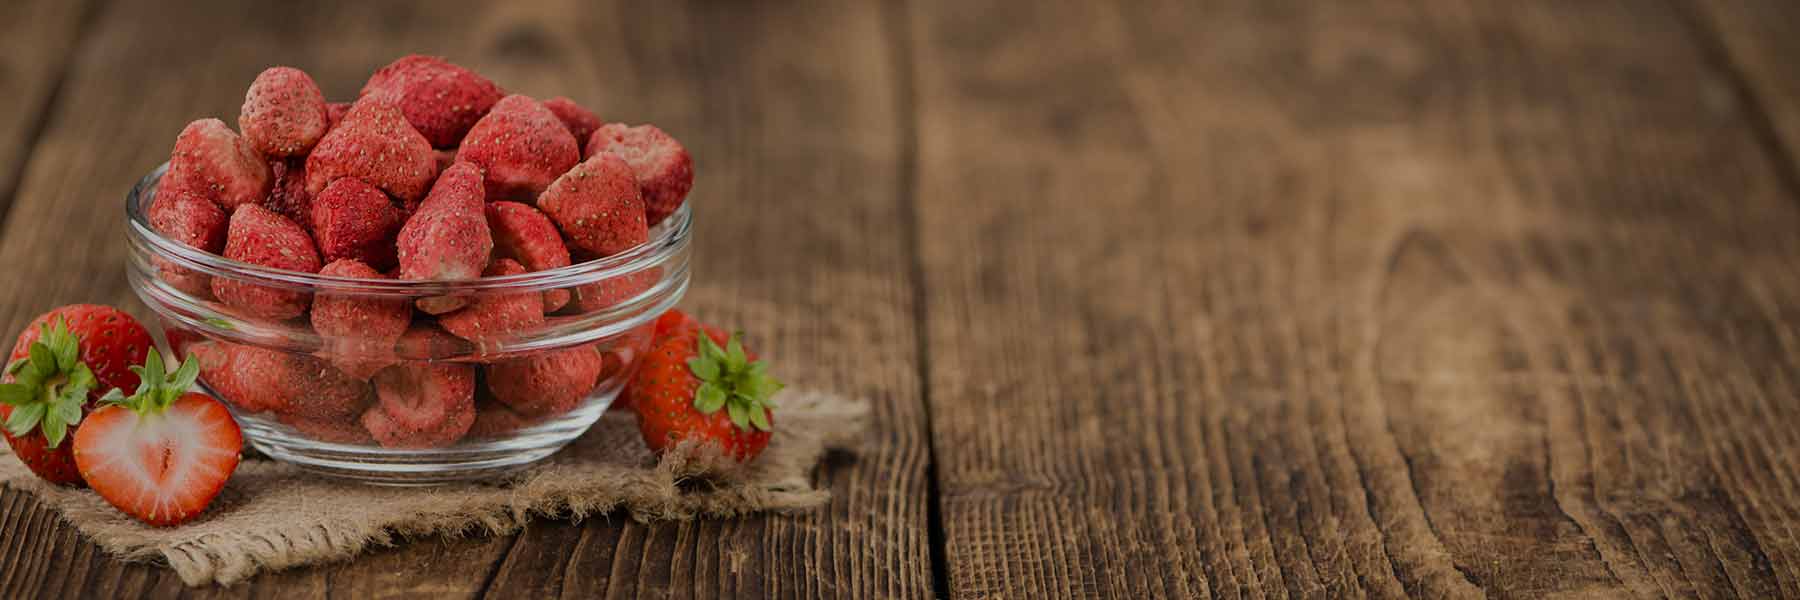 Organic Strawberry Flakes - Nutracelle